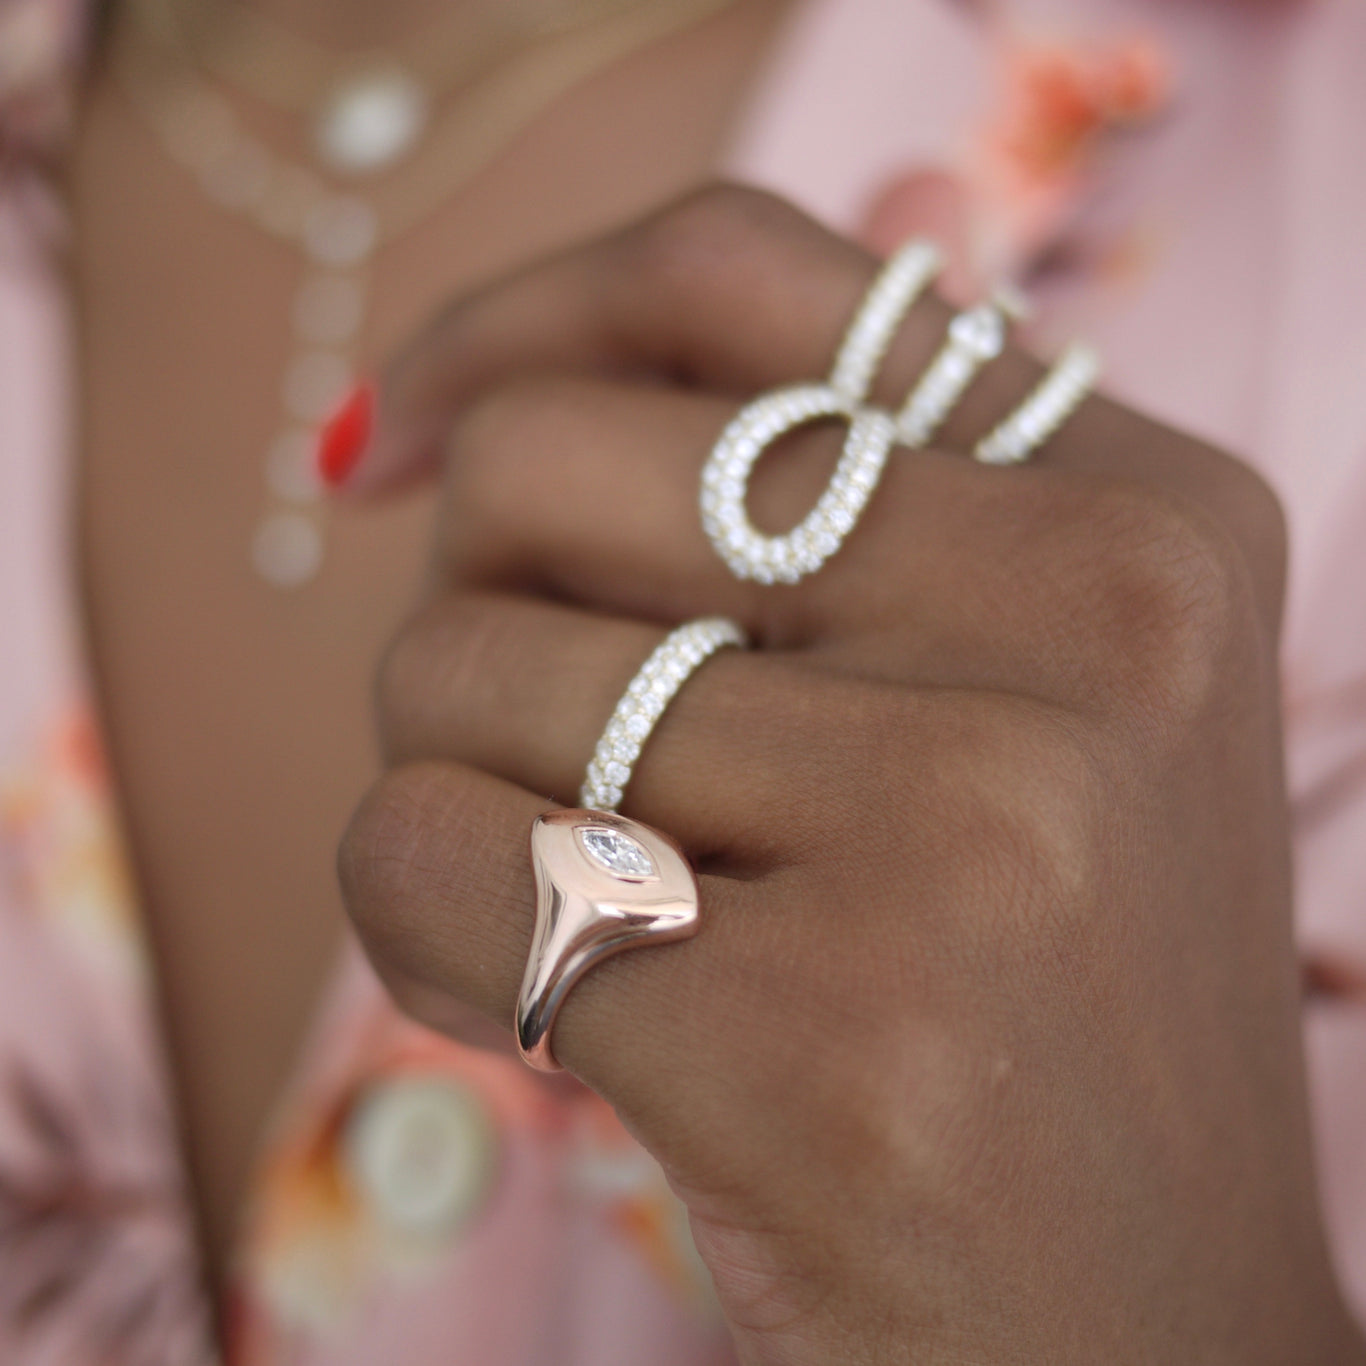 Marquise Pinky Ring shown with the Athena Ring.